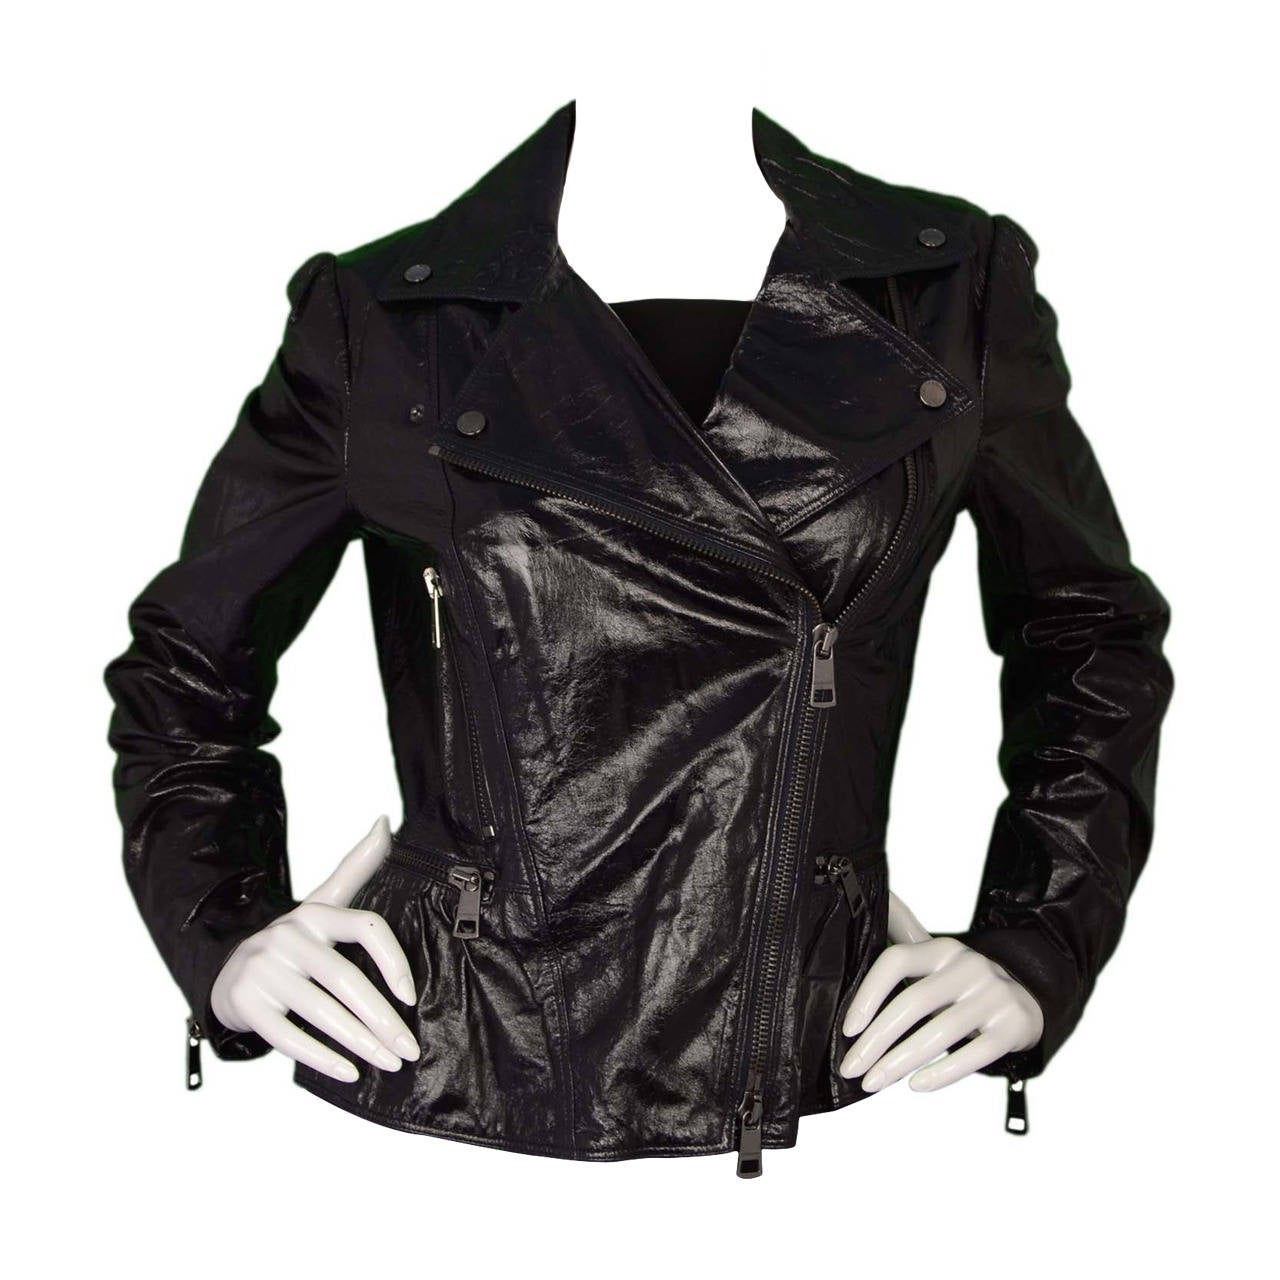 BURBERRY Black Patent Motorcyle Jacket sz 10 rt. $1,795 For Sale at 1stdibs